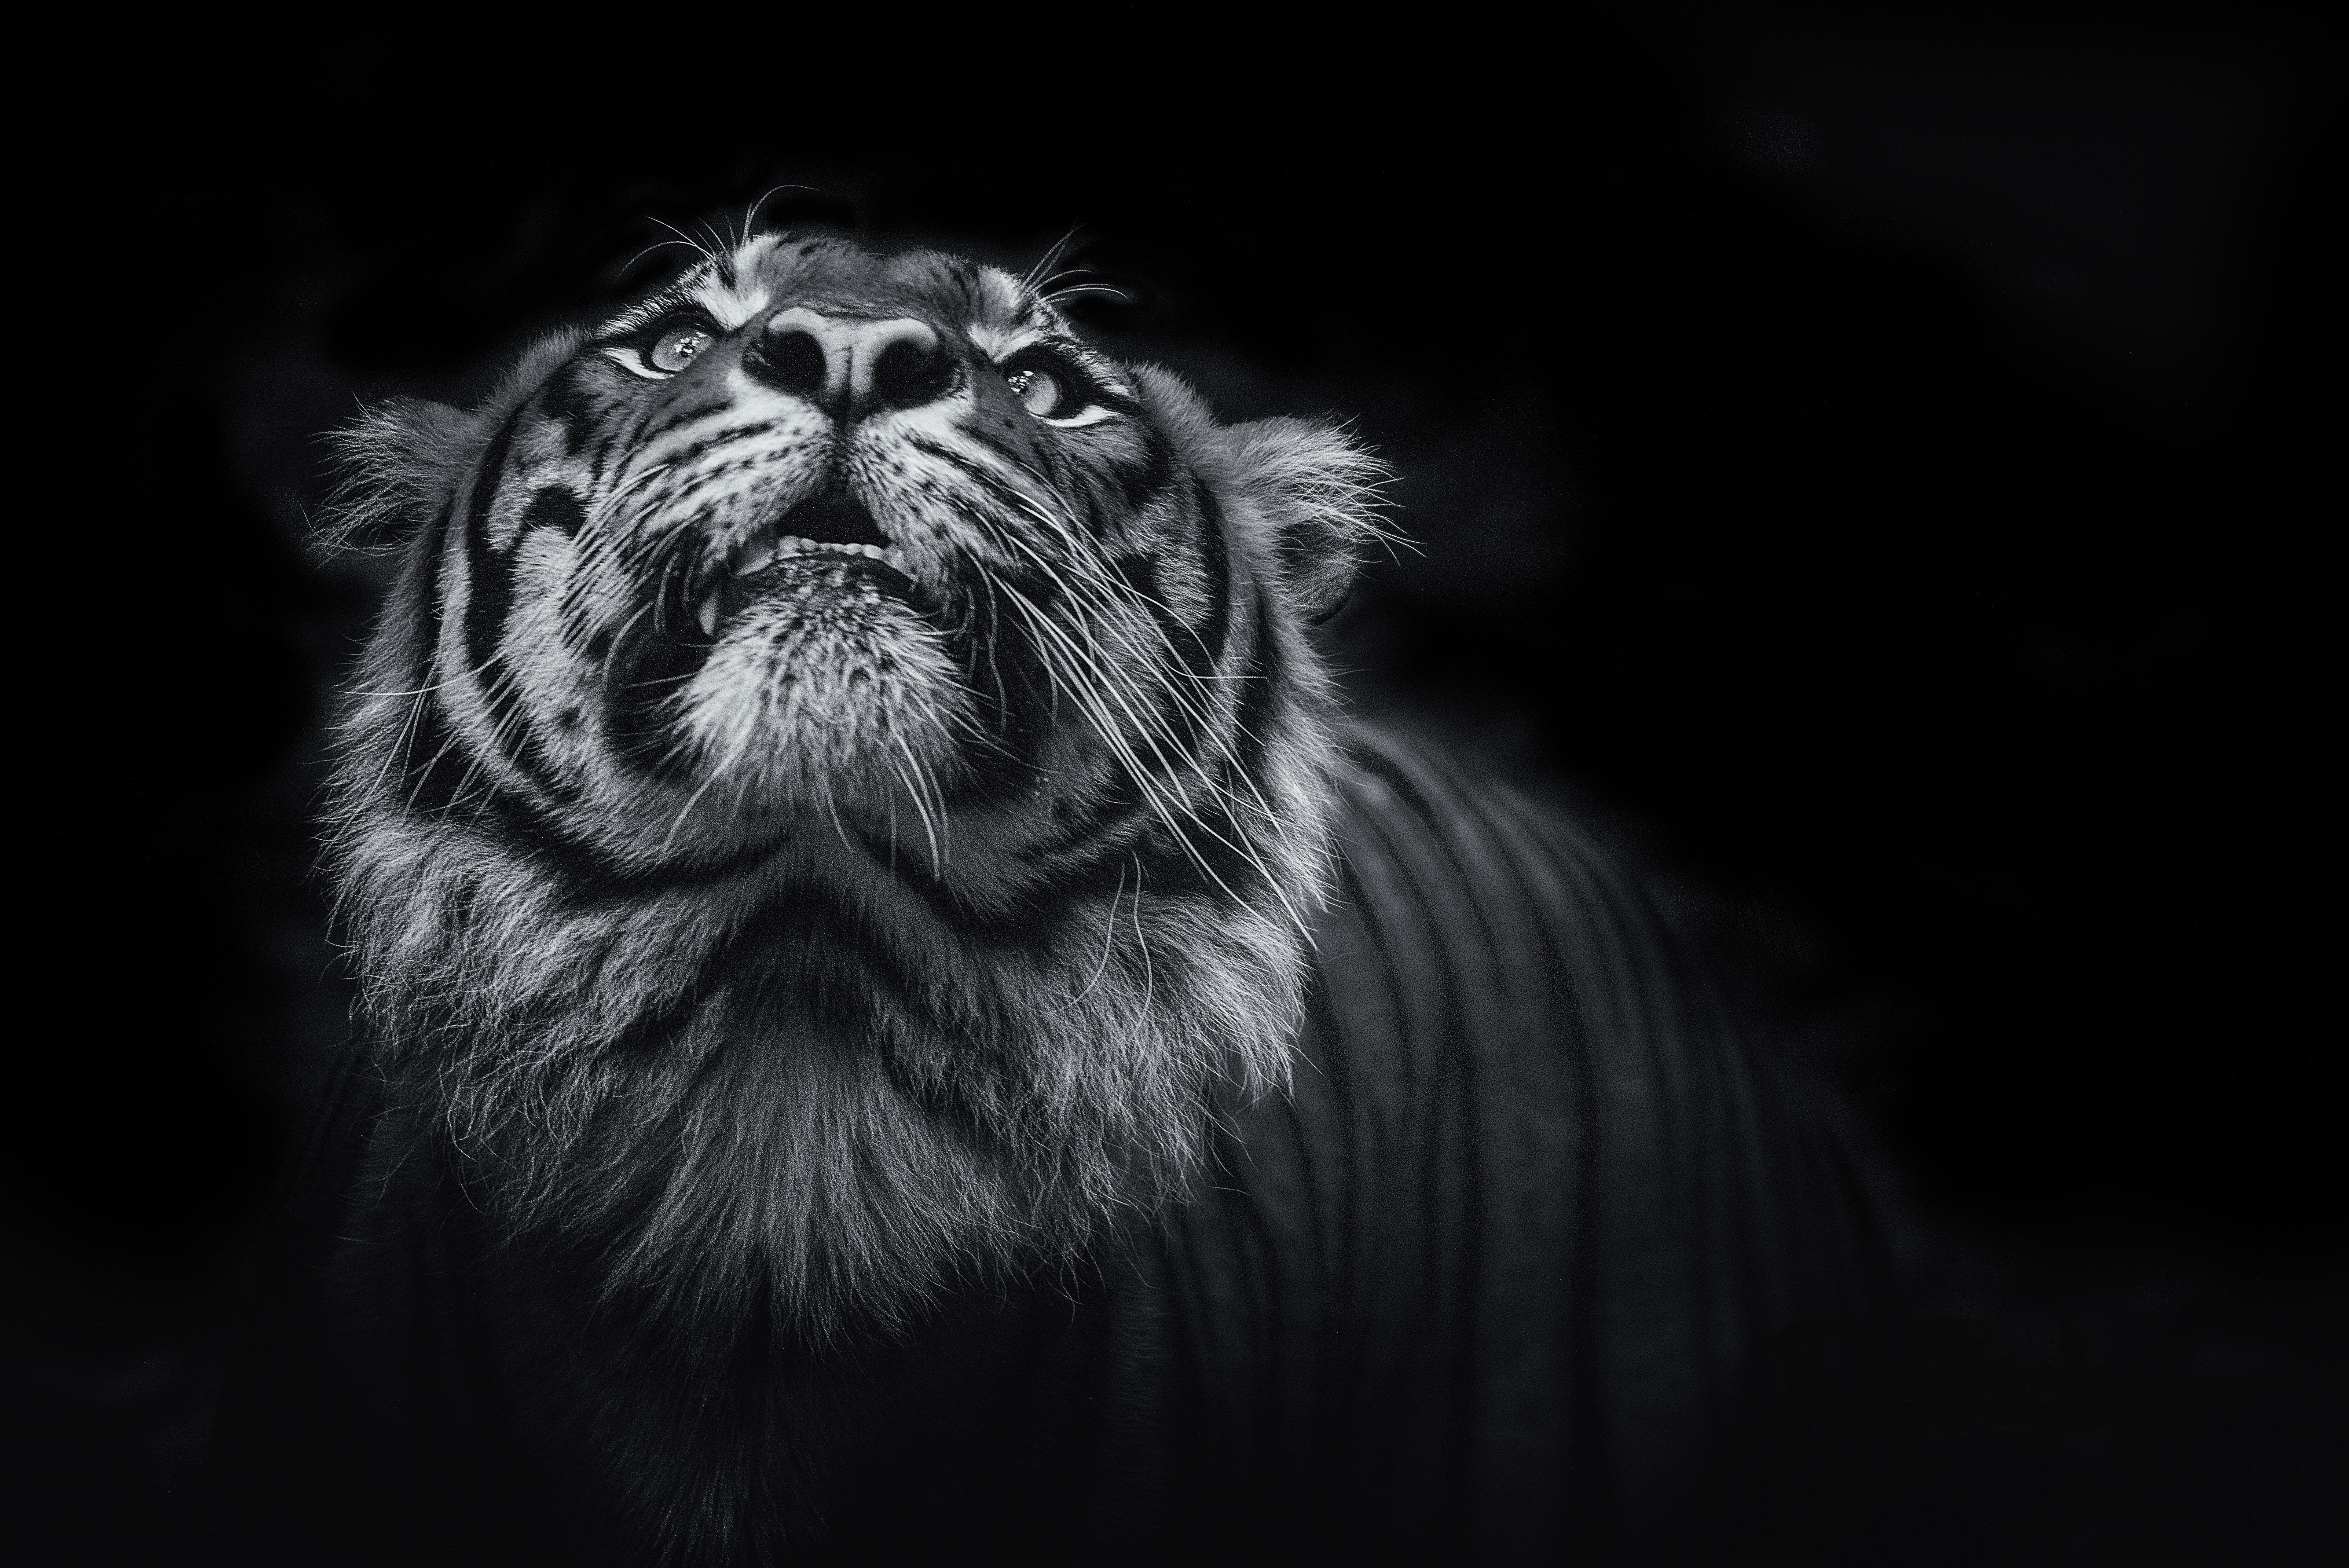 Tiger Monochrome 5k, HD Animals, 4k Wallpaper, Image, Background, Photo and Picture